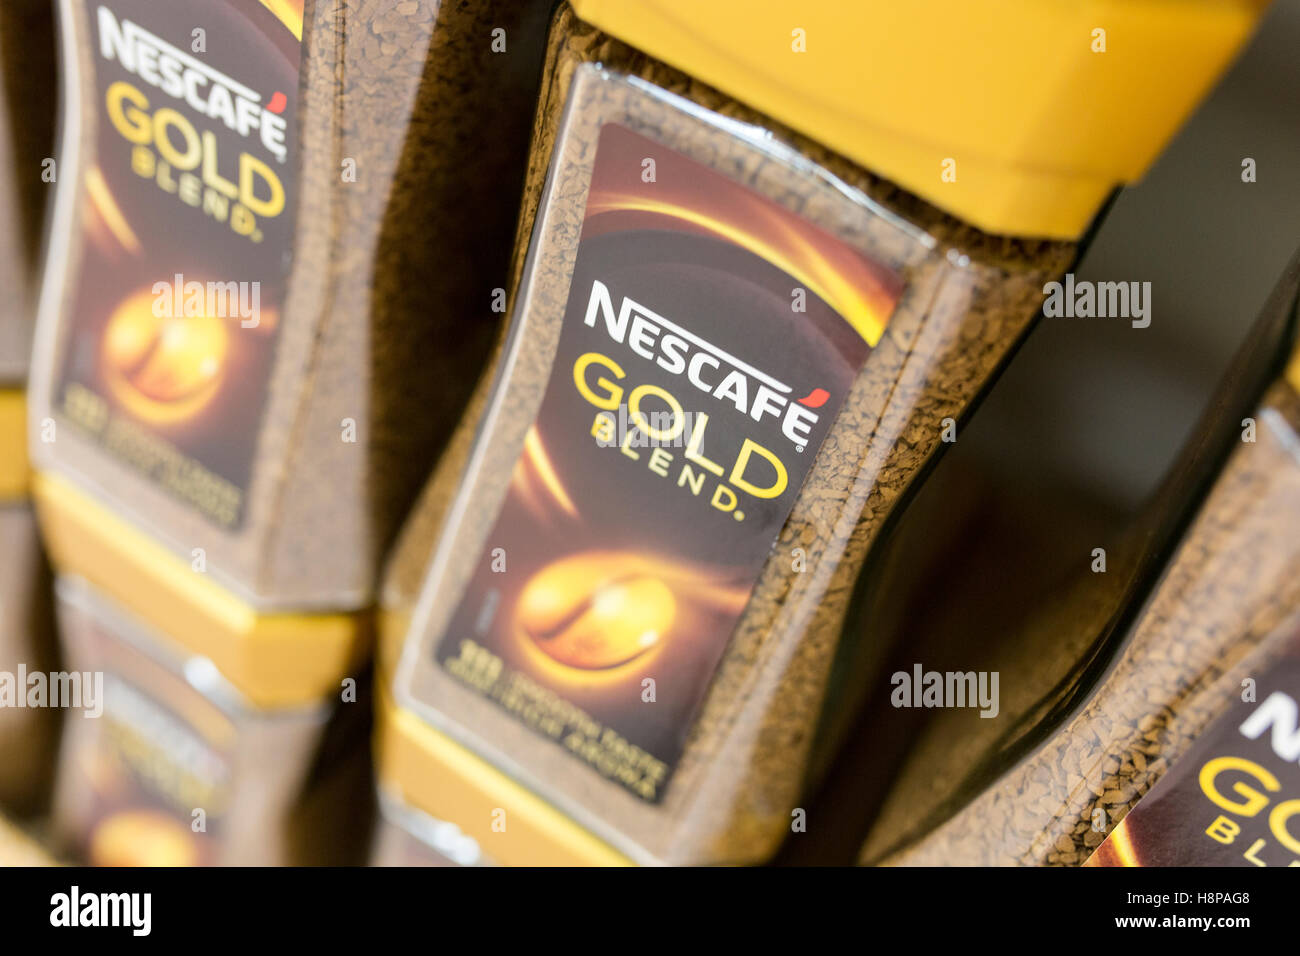 inside a British supermarket store Nescafe Gold blend instant  coffee Stock Photo